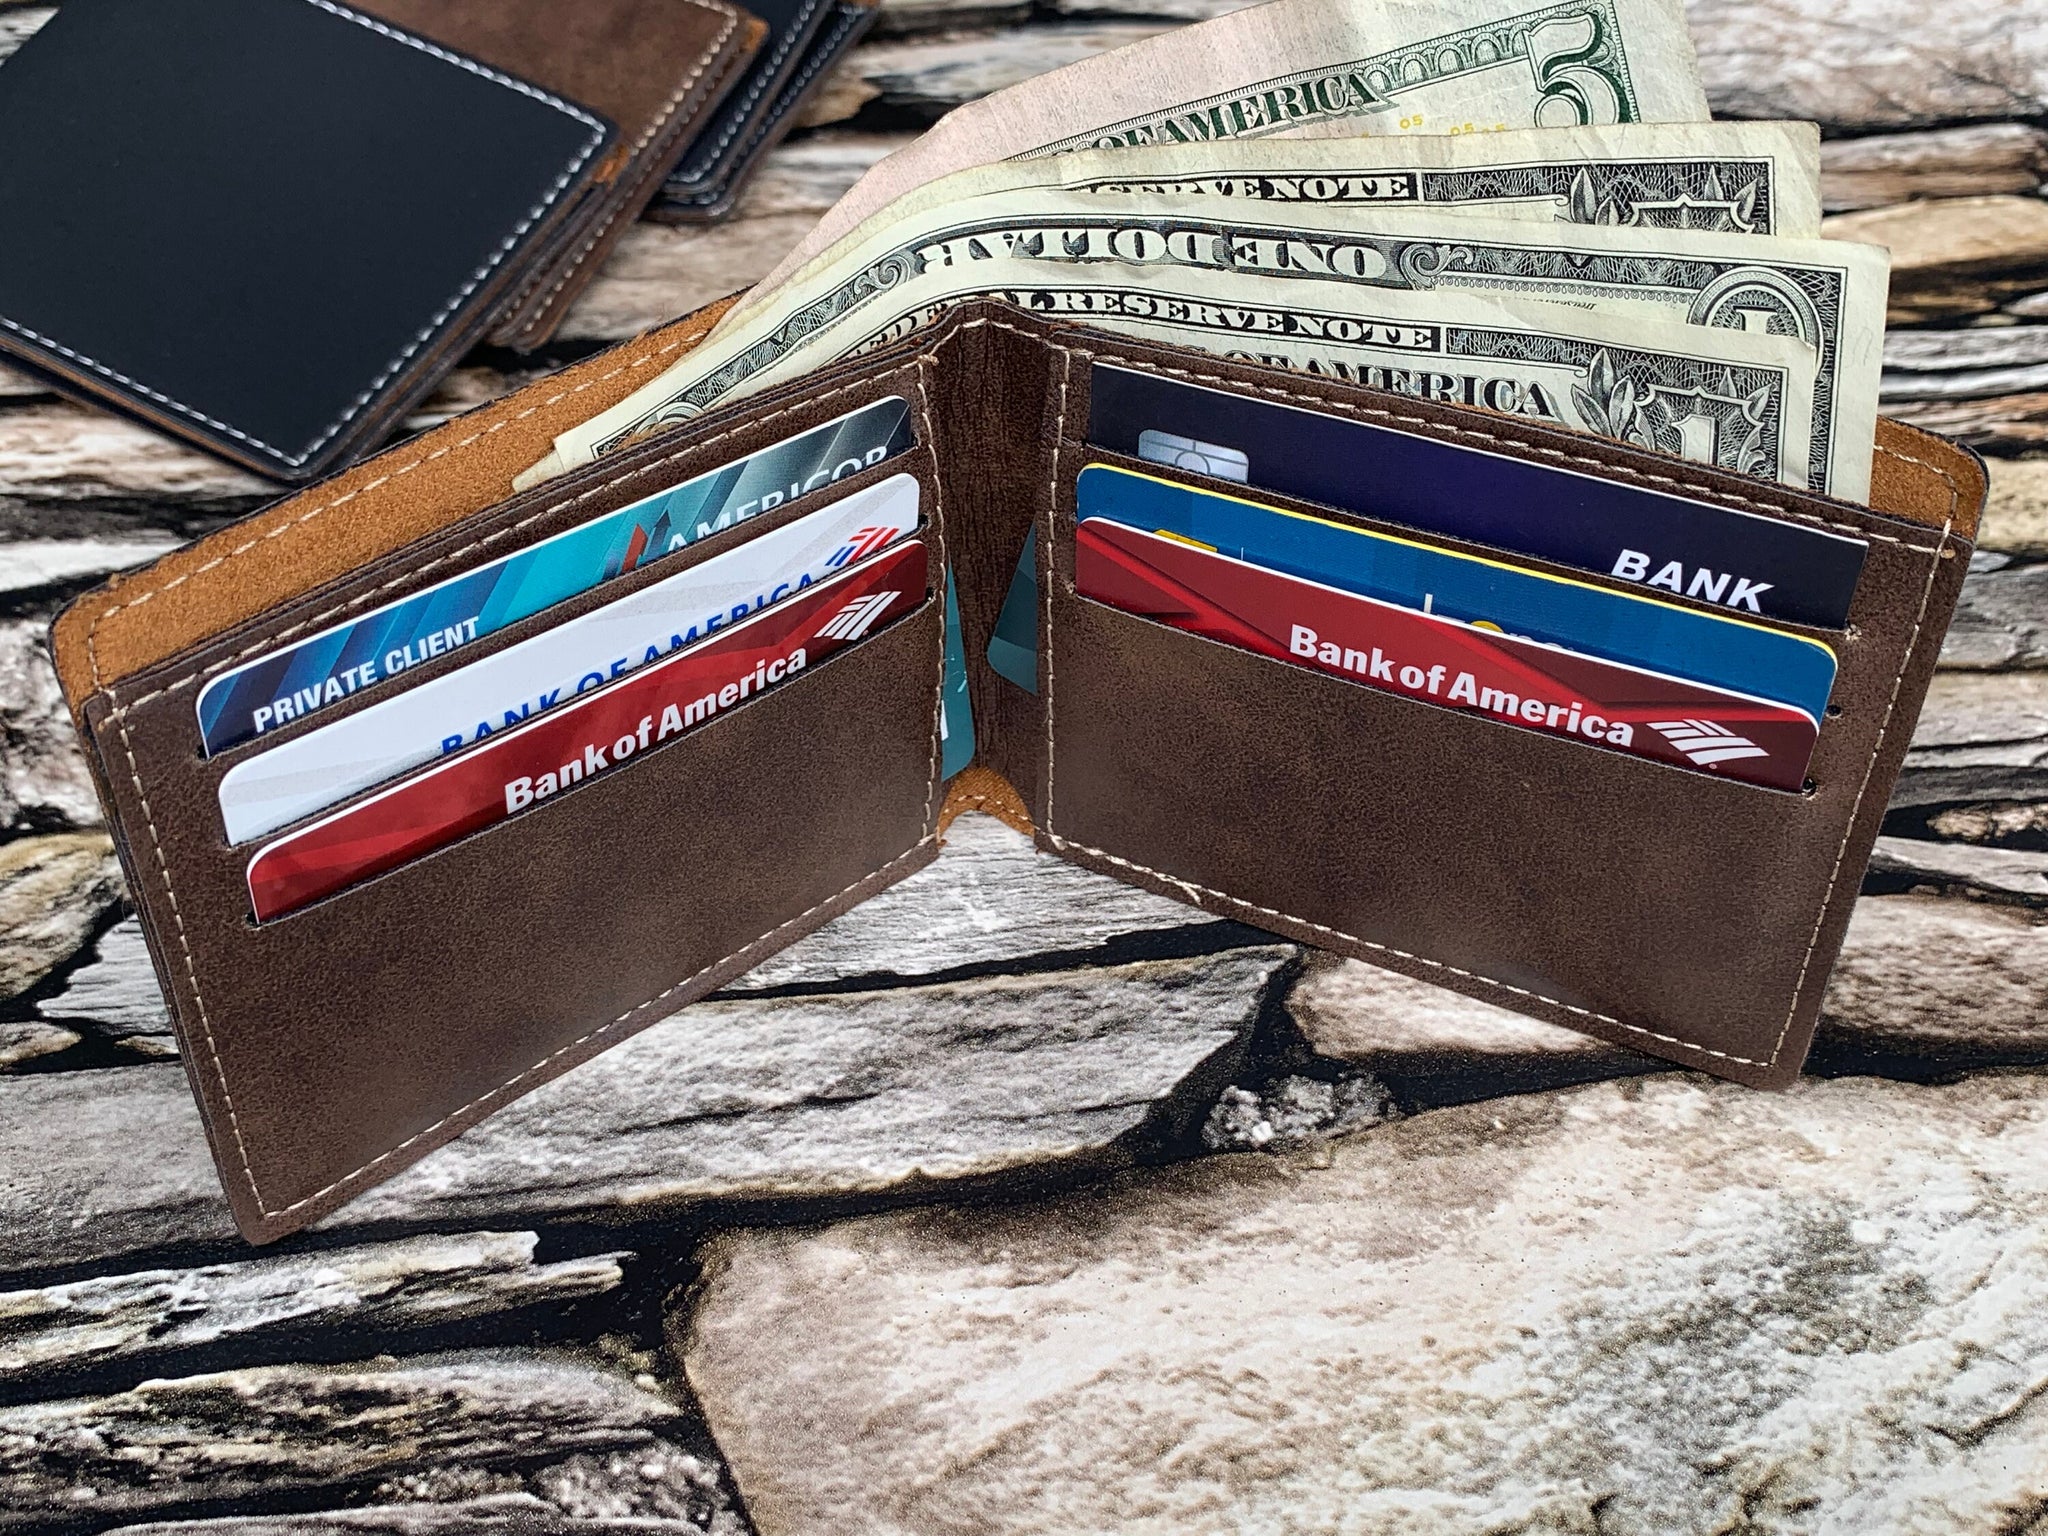 Mens Wallet, Father's Day Gift, Engraved Men's Wallet